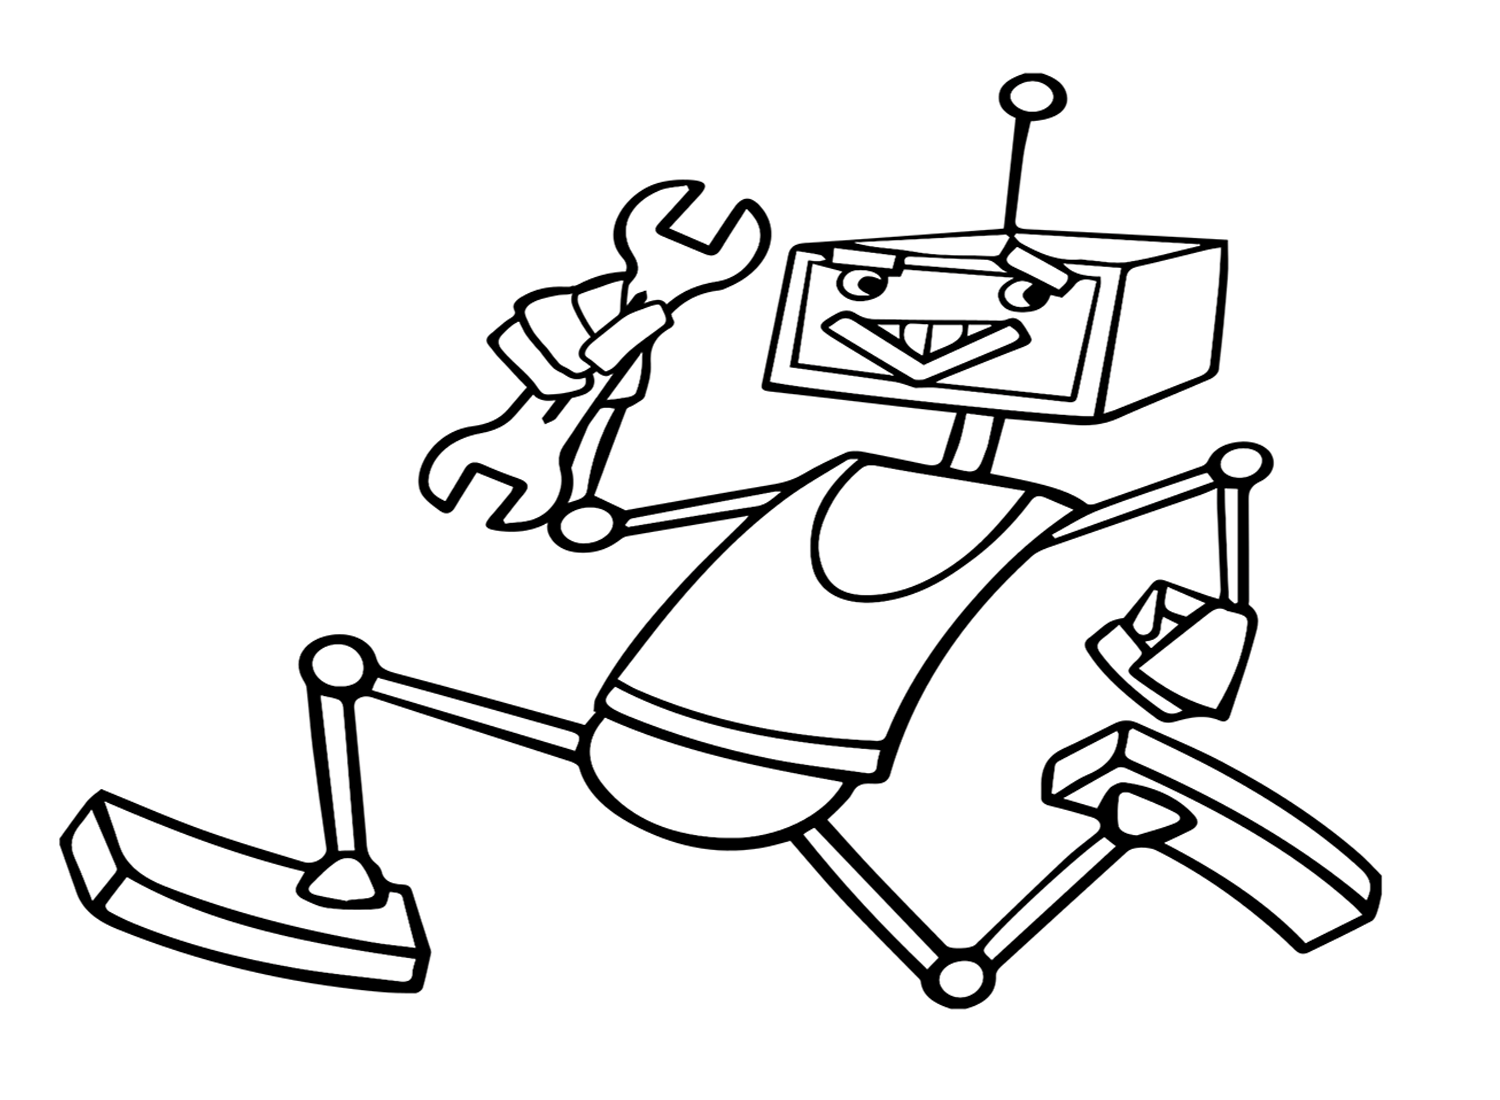 Robot with Wrench Coloring Pages